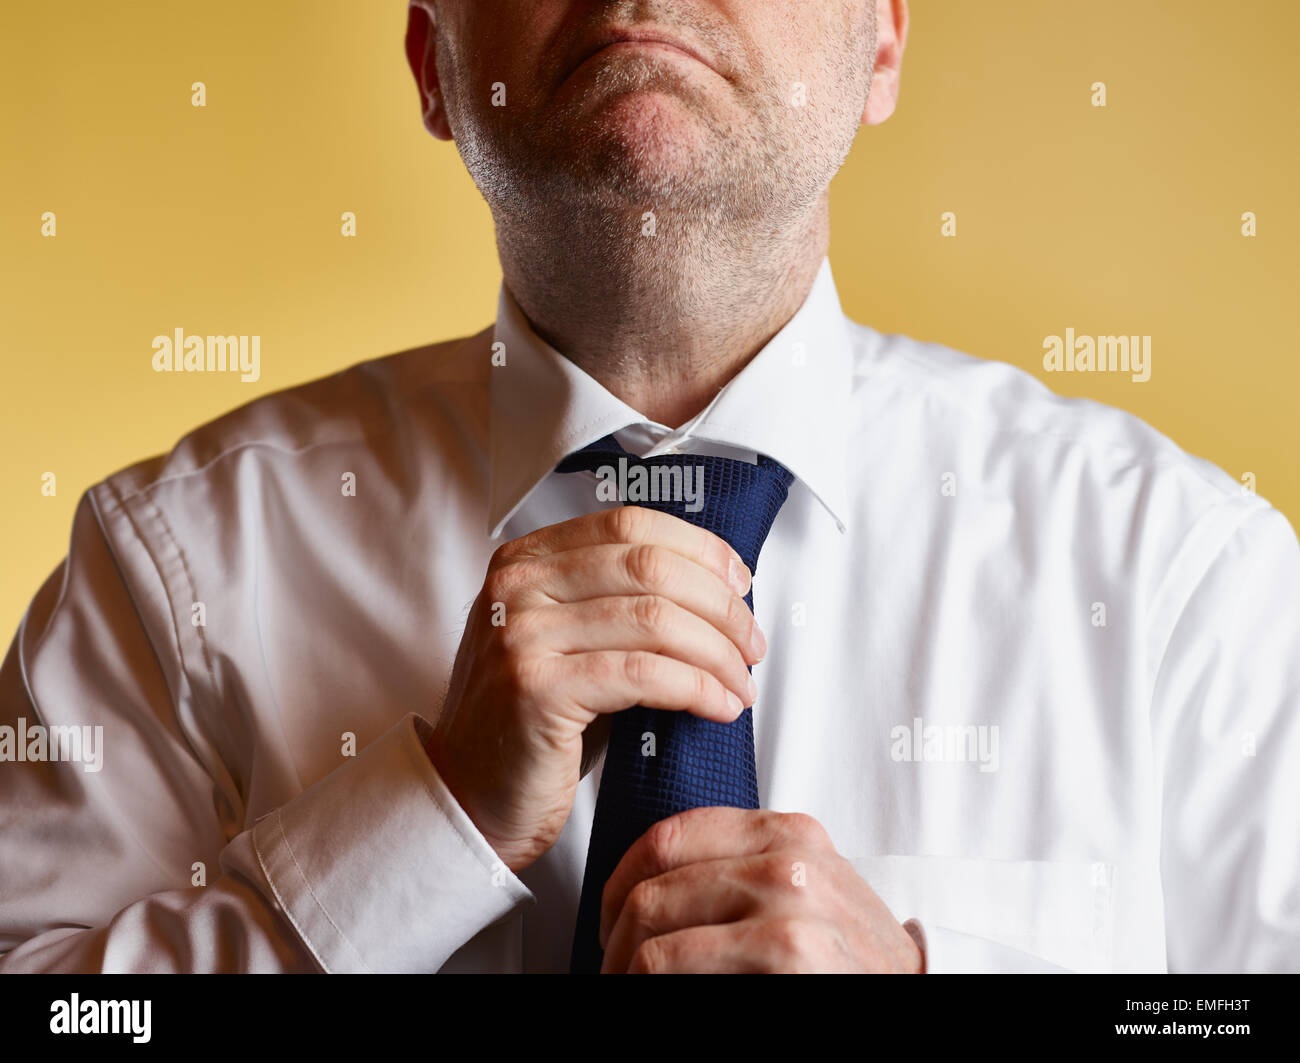 Close up, male wearing white shirt and blue tie, he tighten the tie knot, yellow background Stock Photo